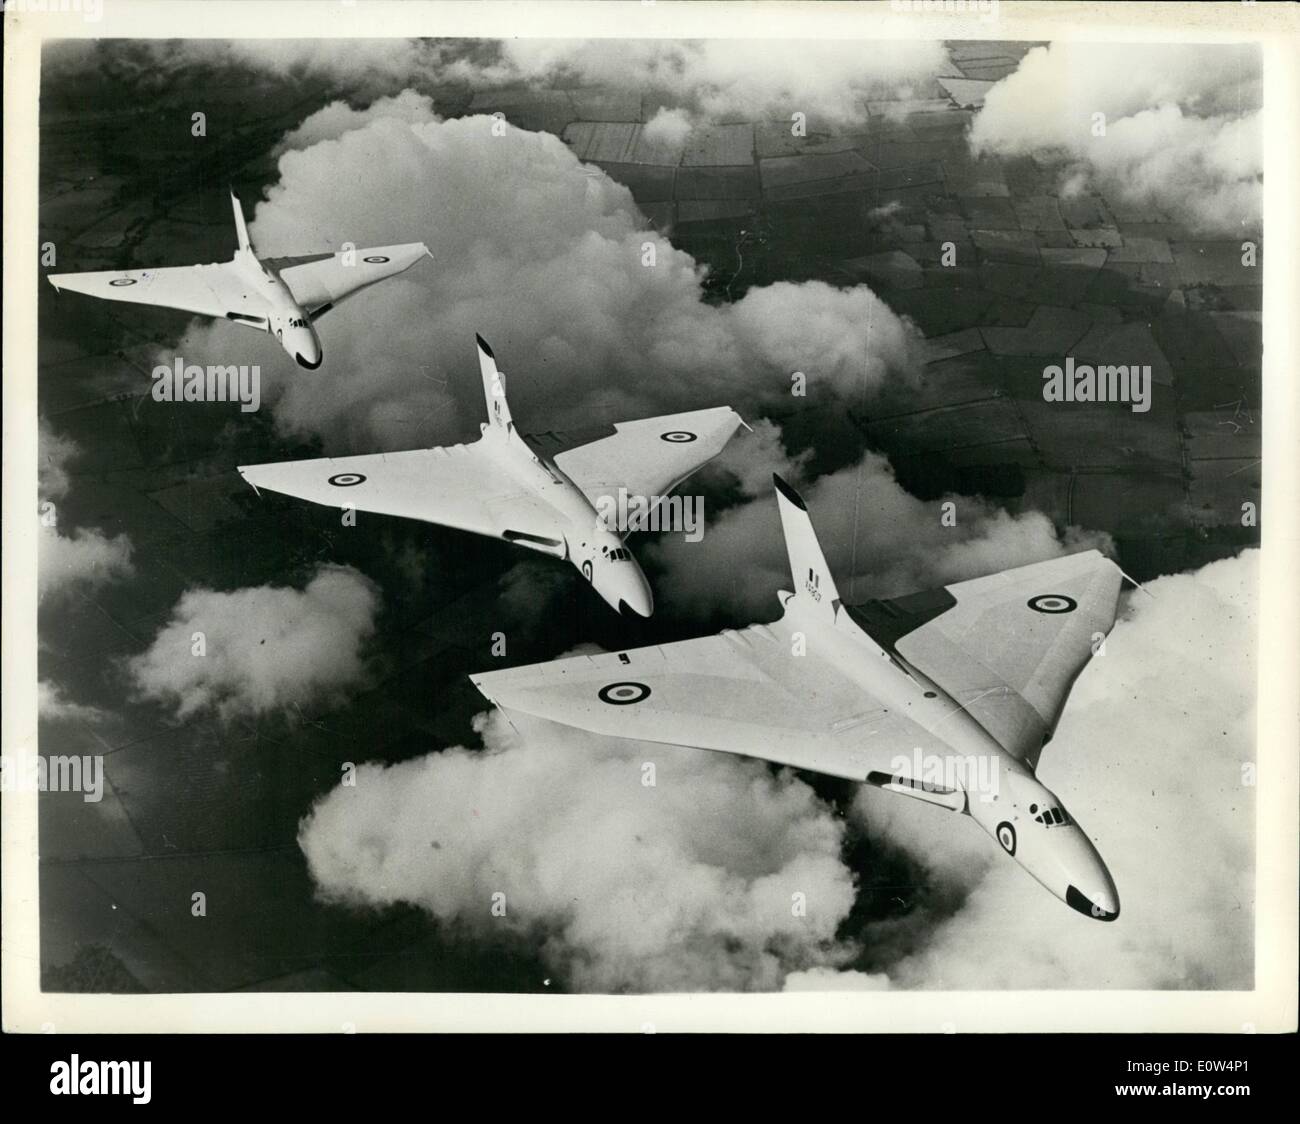 Jun. 06, 1961 - British High-Performance Jet ''Deterrents'' To Fly in U.S.: Flying above Lincolnshire, England, is a trio of Avro Vulcans, four-engined turbo-jet delta-wing bombers of the Royal Air Force's war deterrent of high-performance jets and thermo-nuclear weapons. Two Mark I Vulcans are to represent Britain at the 50th anniversary of naval aviation at the Pensacola Naval Air Station, Florida. Arriving on June 8, they will be from the R.A.F.'s No.617 Squadron, ''The Dambusters'' because of their precision bombing of German dams in World War II Stock Photo